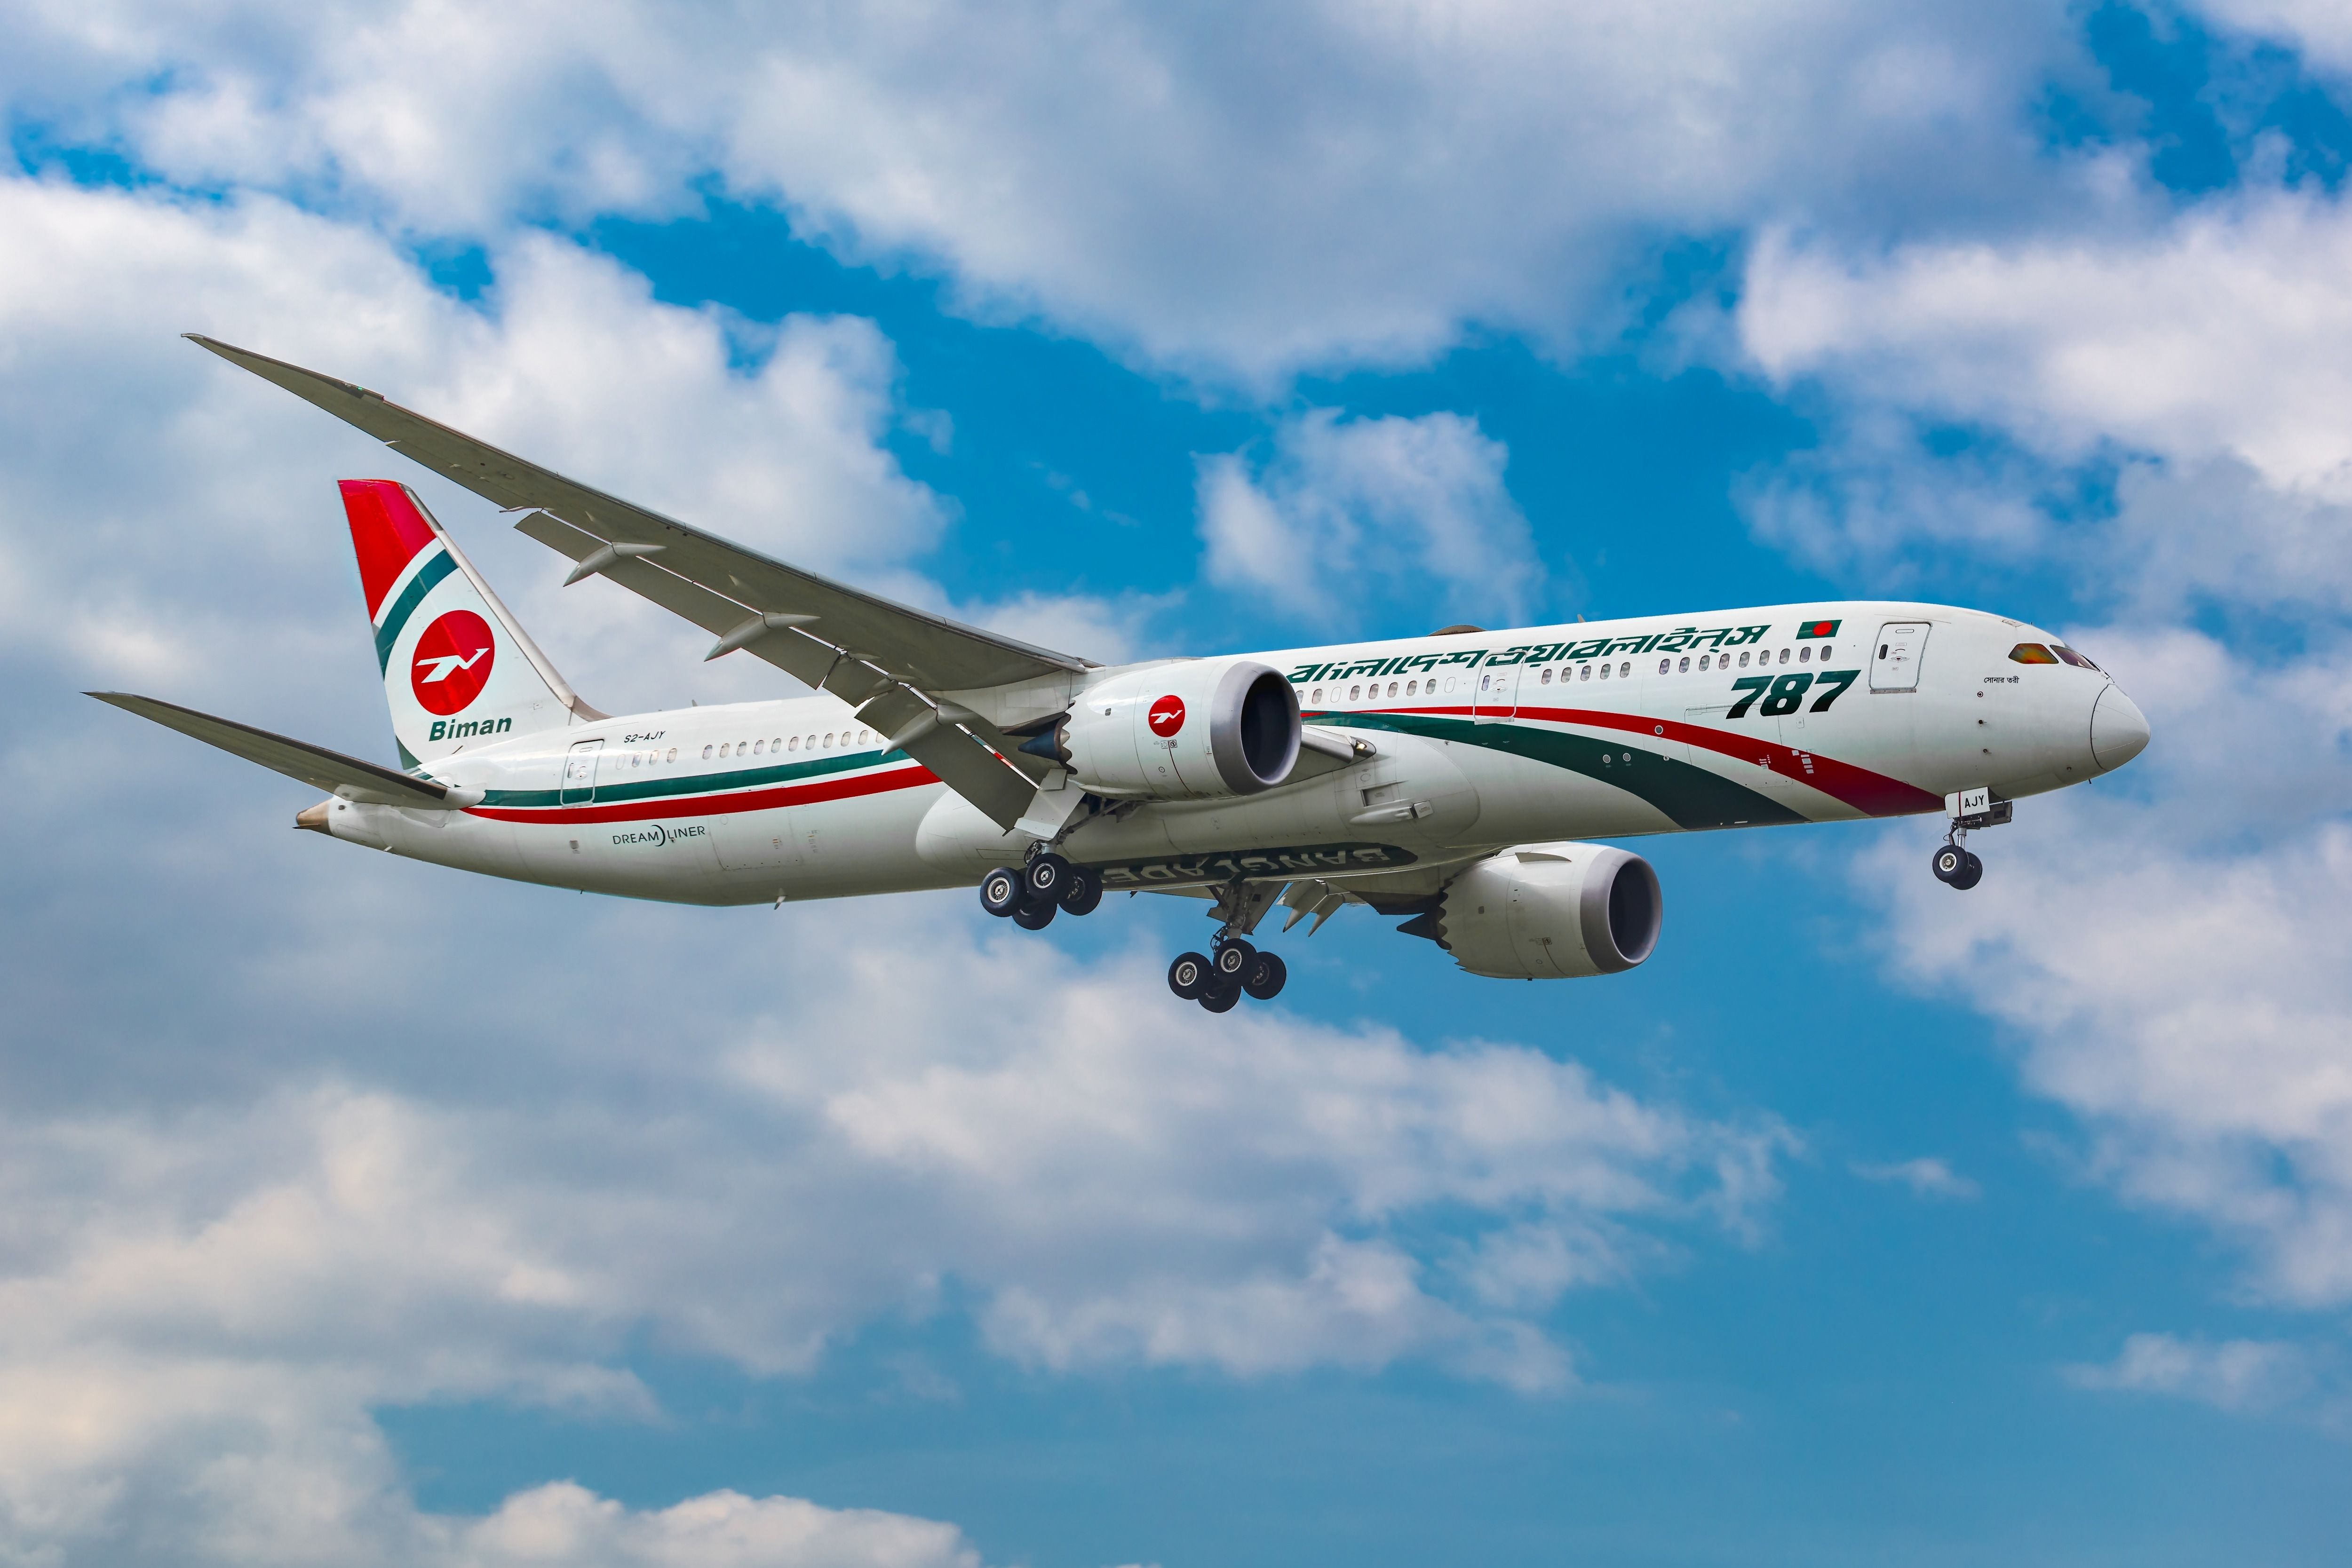 Biman Bangladesh Airlines Boeing 787 Dreamliner on approach in London. 